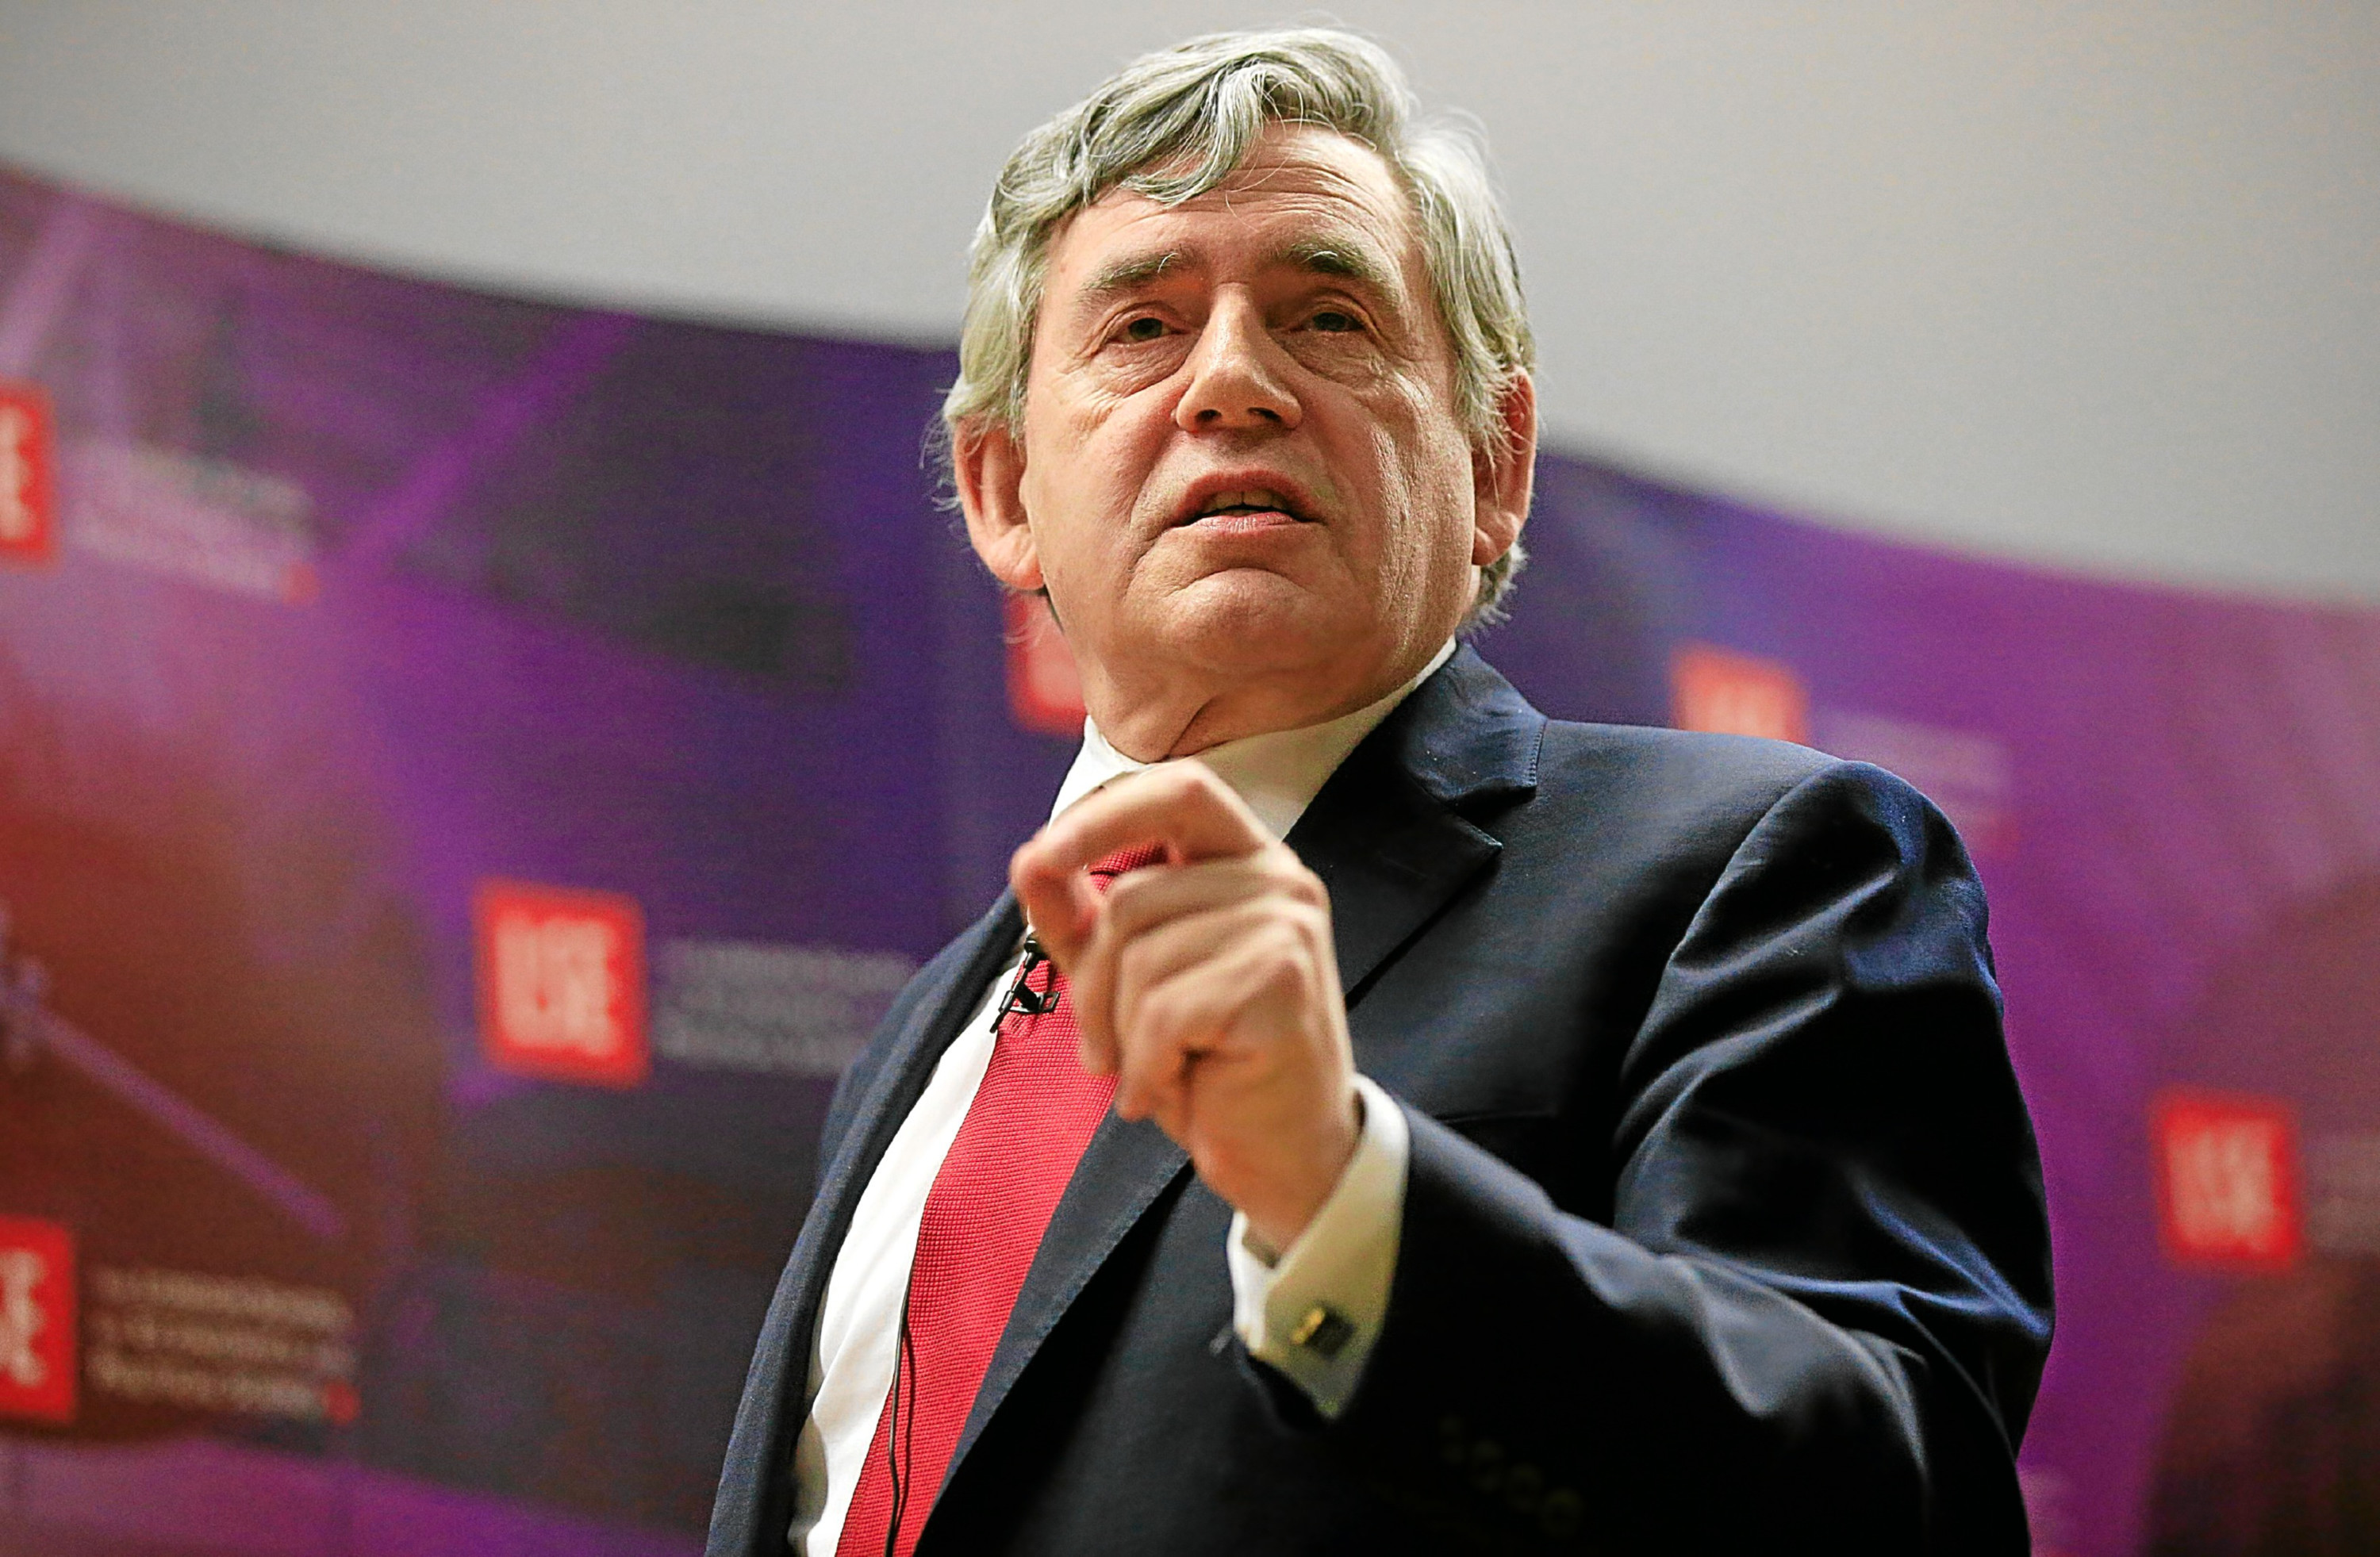 Former prime minister Gordon Brown speaks during the 'Britain: Leading, Not Leaving - the case for remaining in the European Union' event at the London School of Economics.